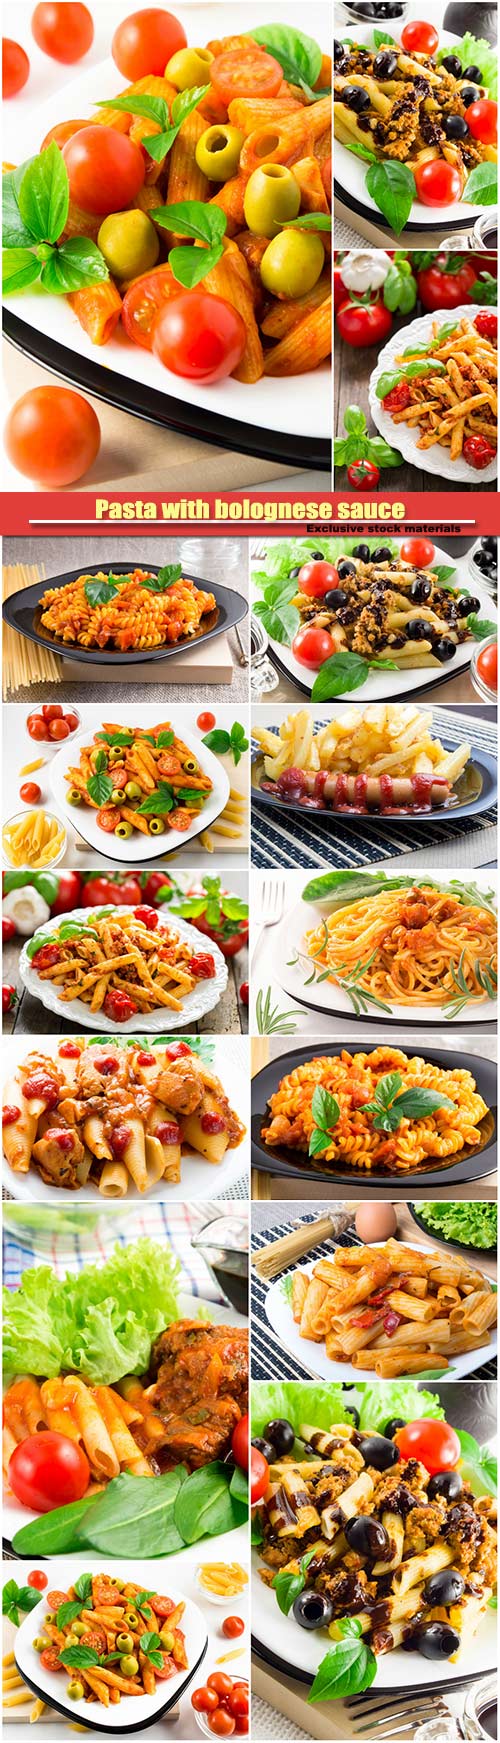 Pasta with bolognese sauce, beef meat, olives and cherry